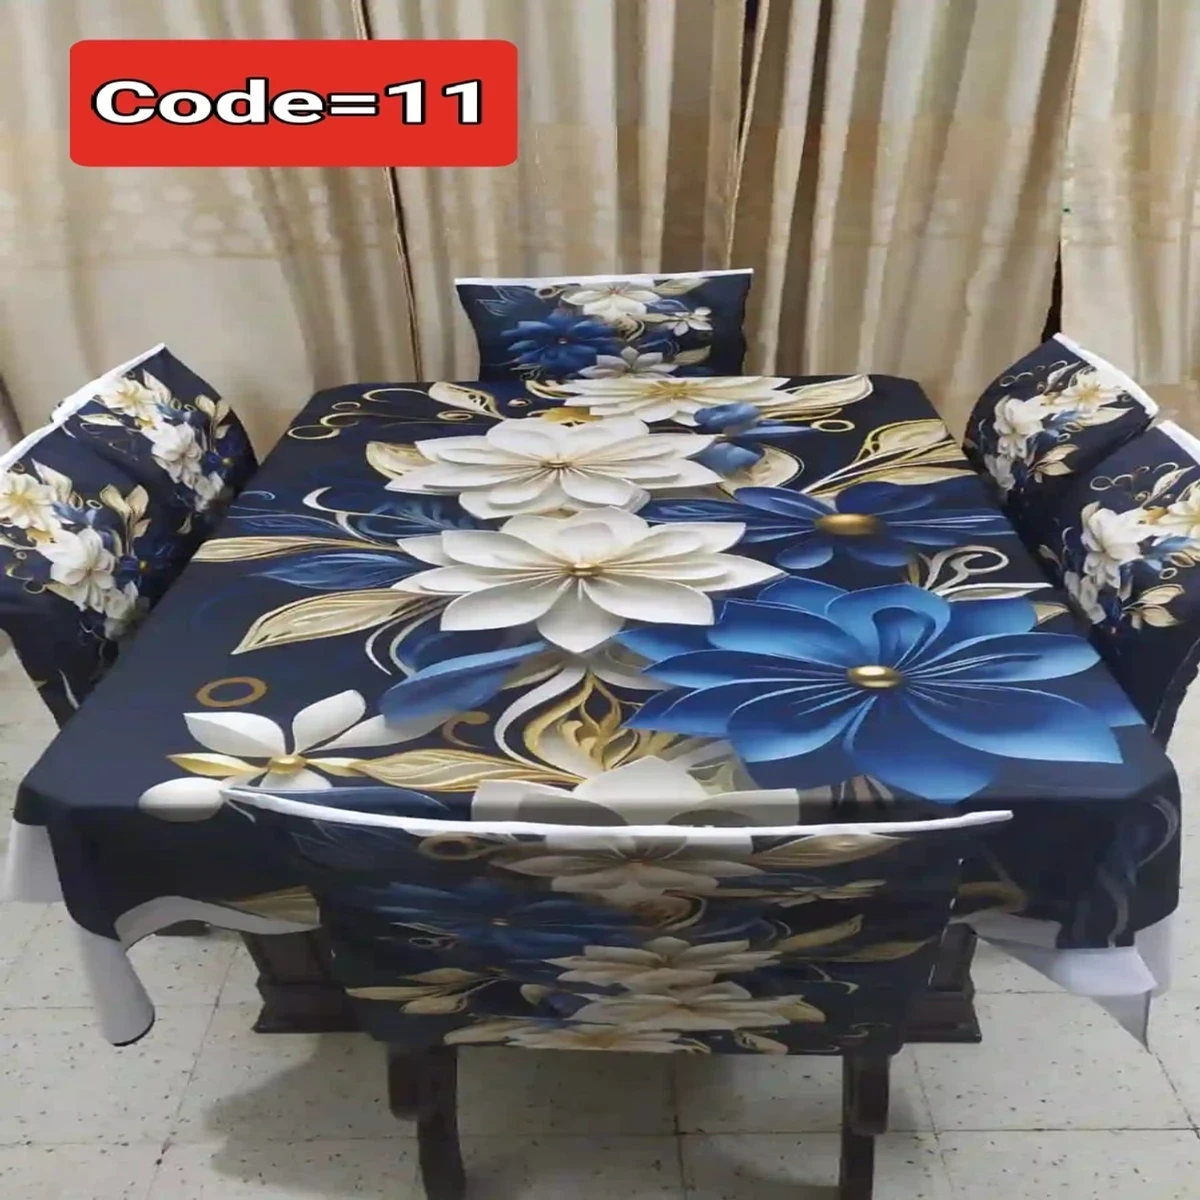 3D Pint Dining Table and Chair Cover Code =11